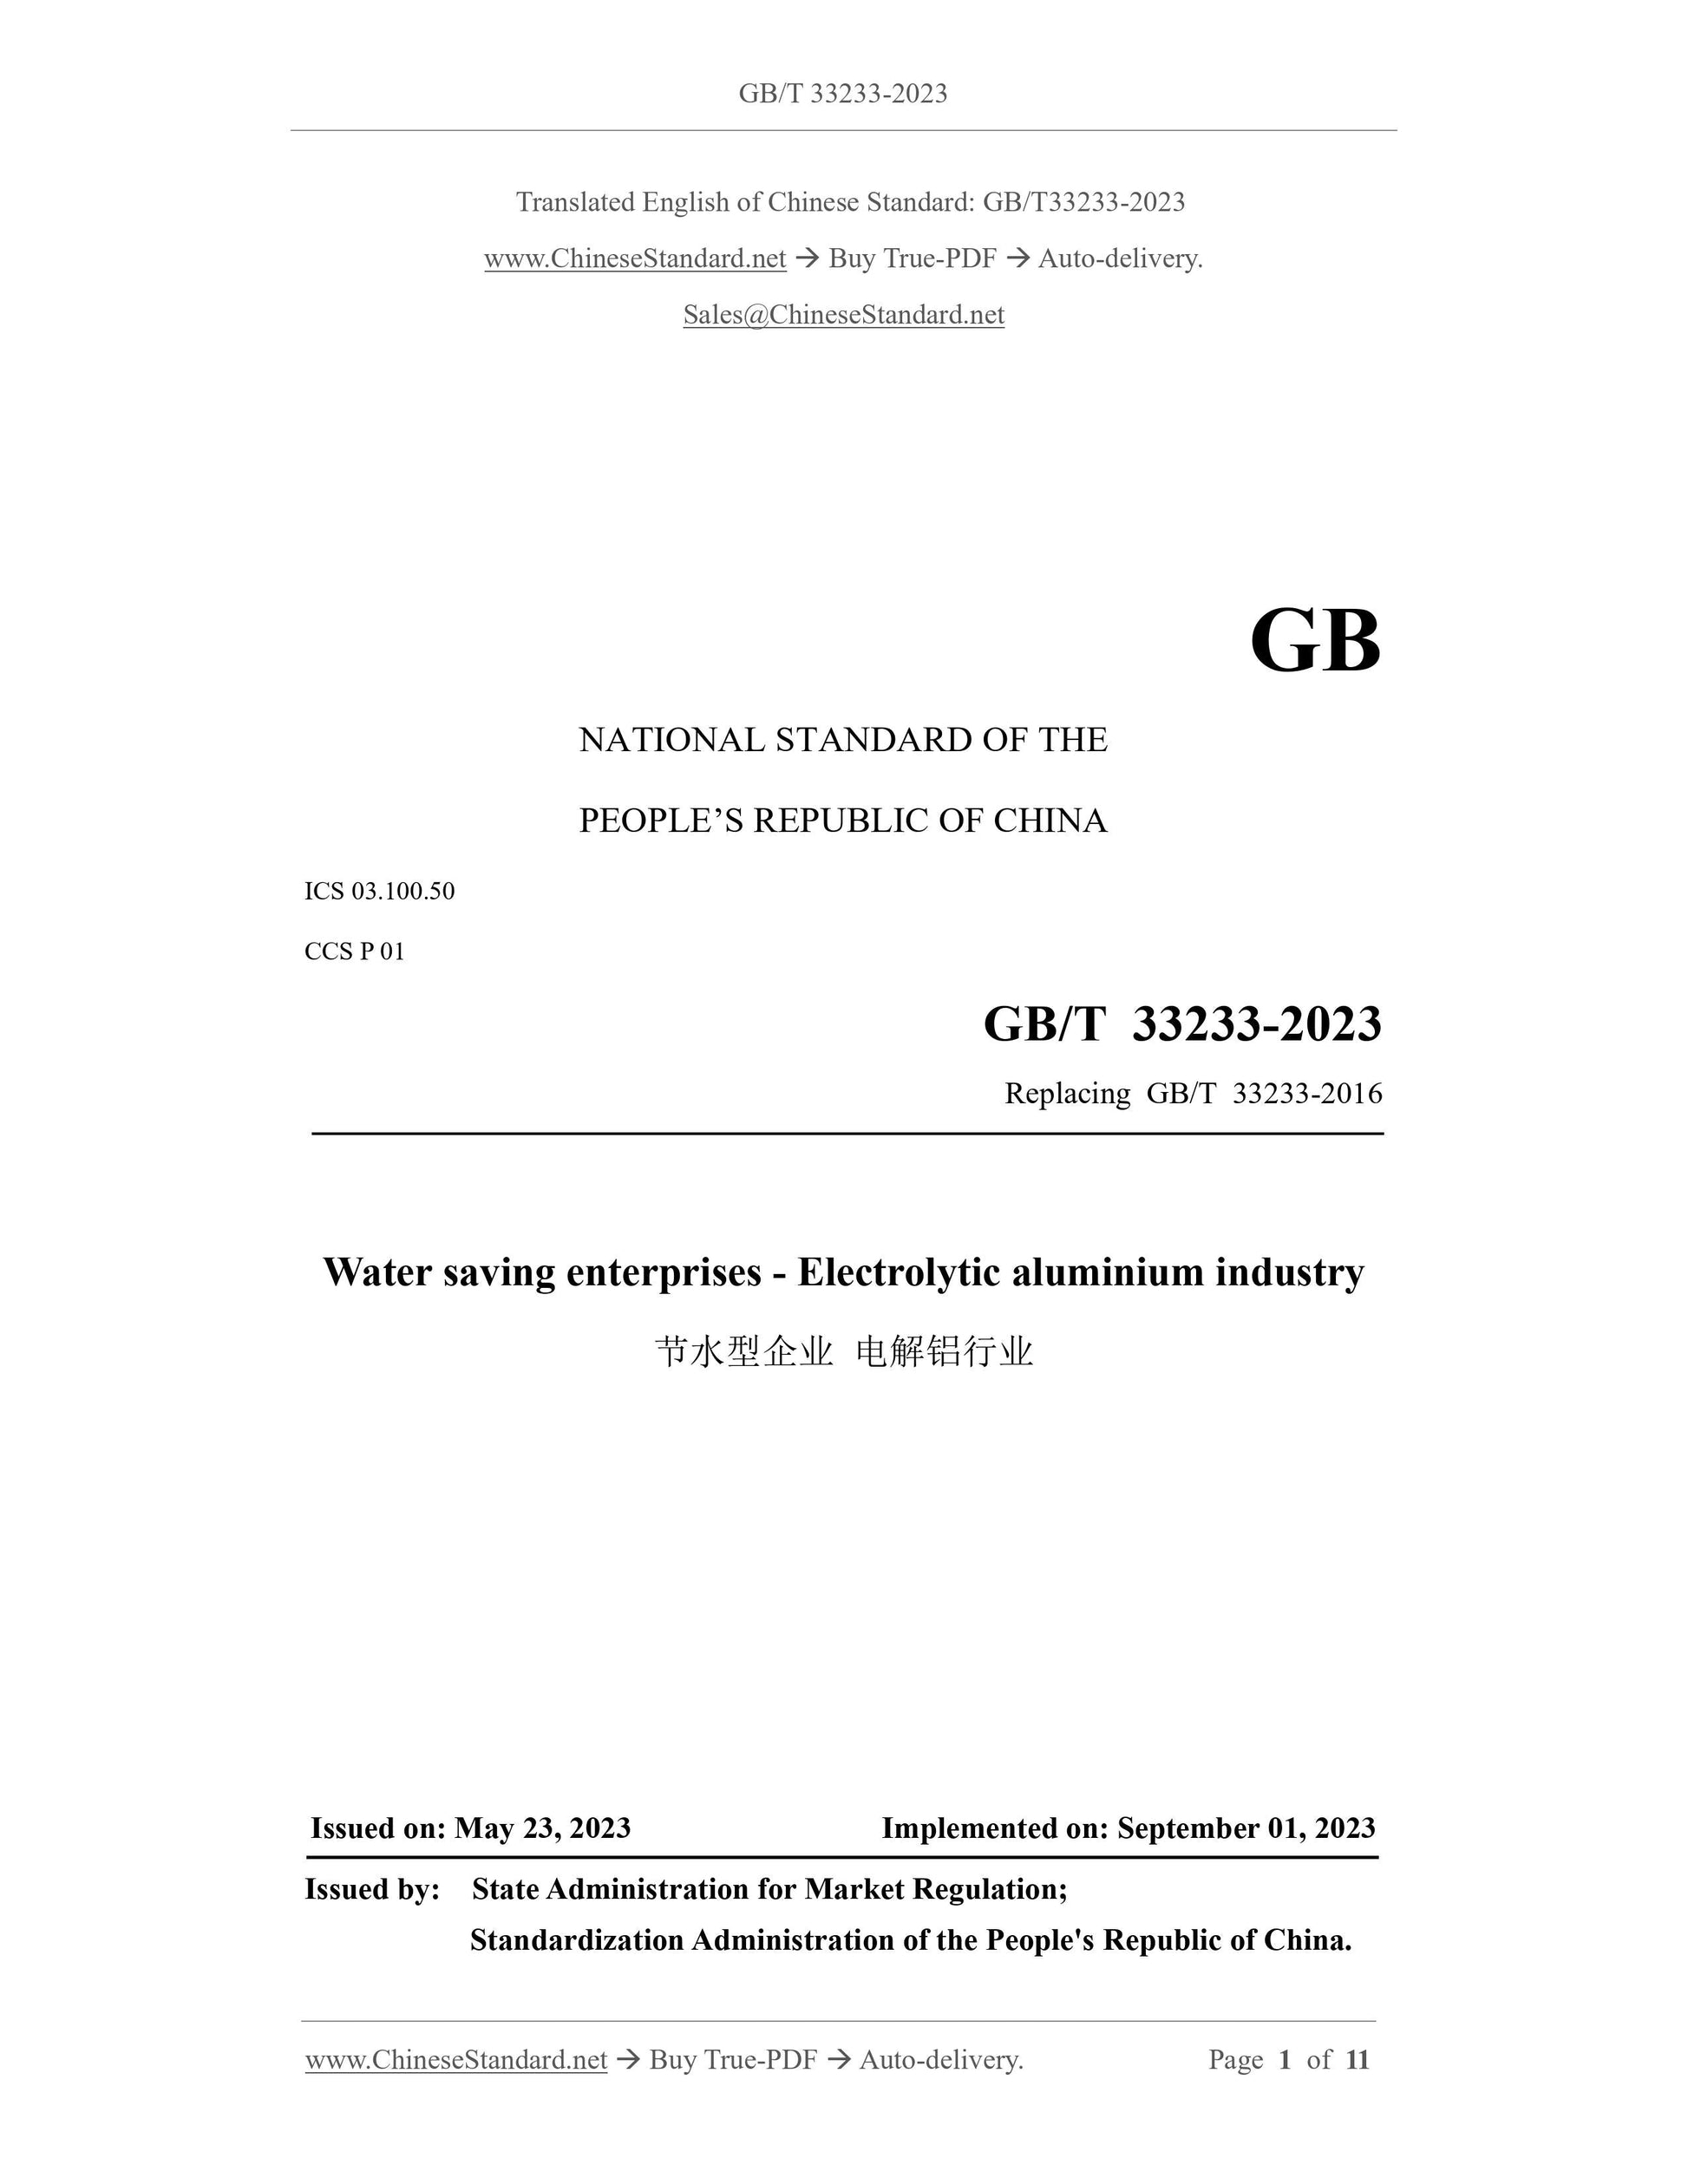 GB/T 33233-2023 Page 1